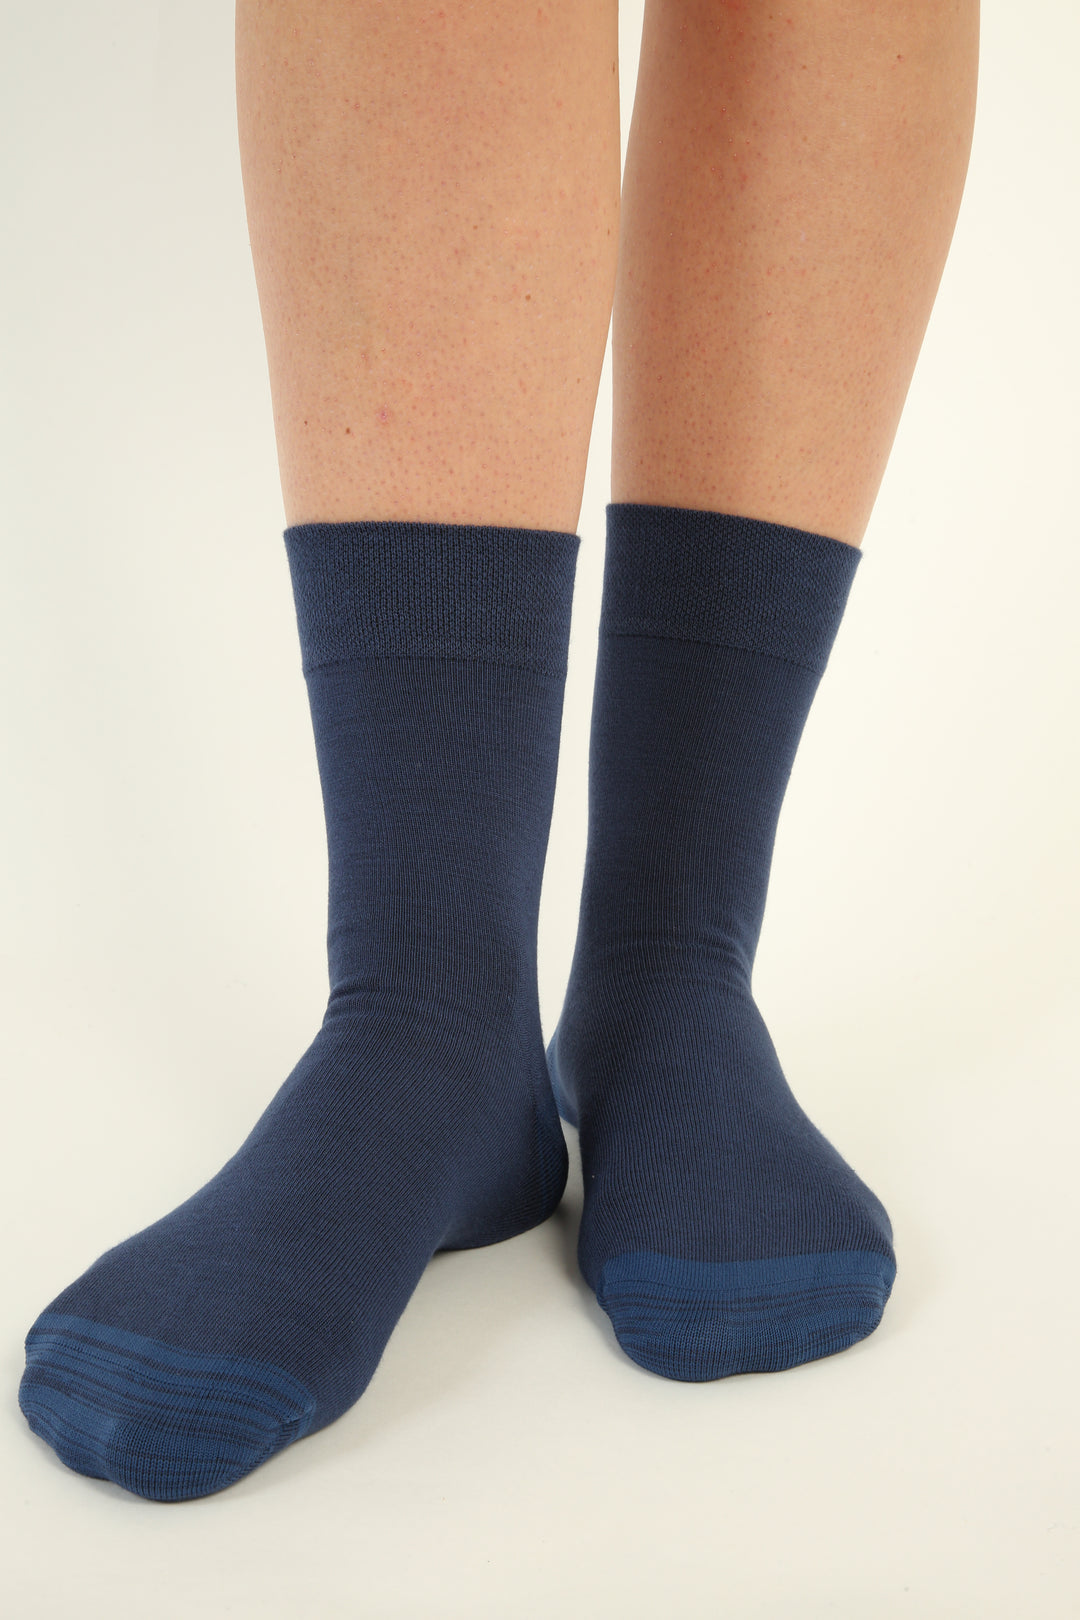 Seamless Bamboo Socks - Jeans color - 6 pairs